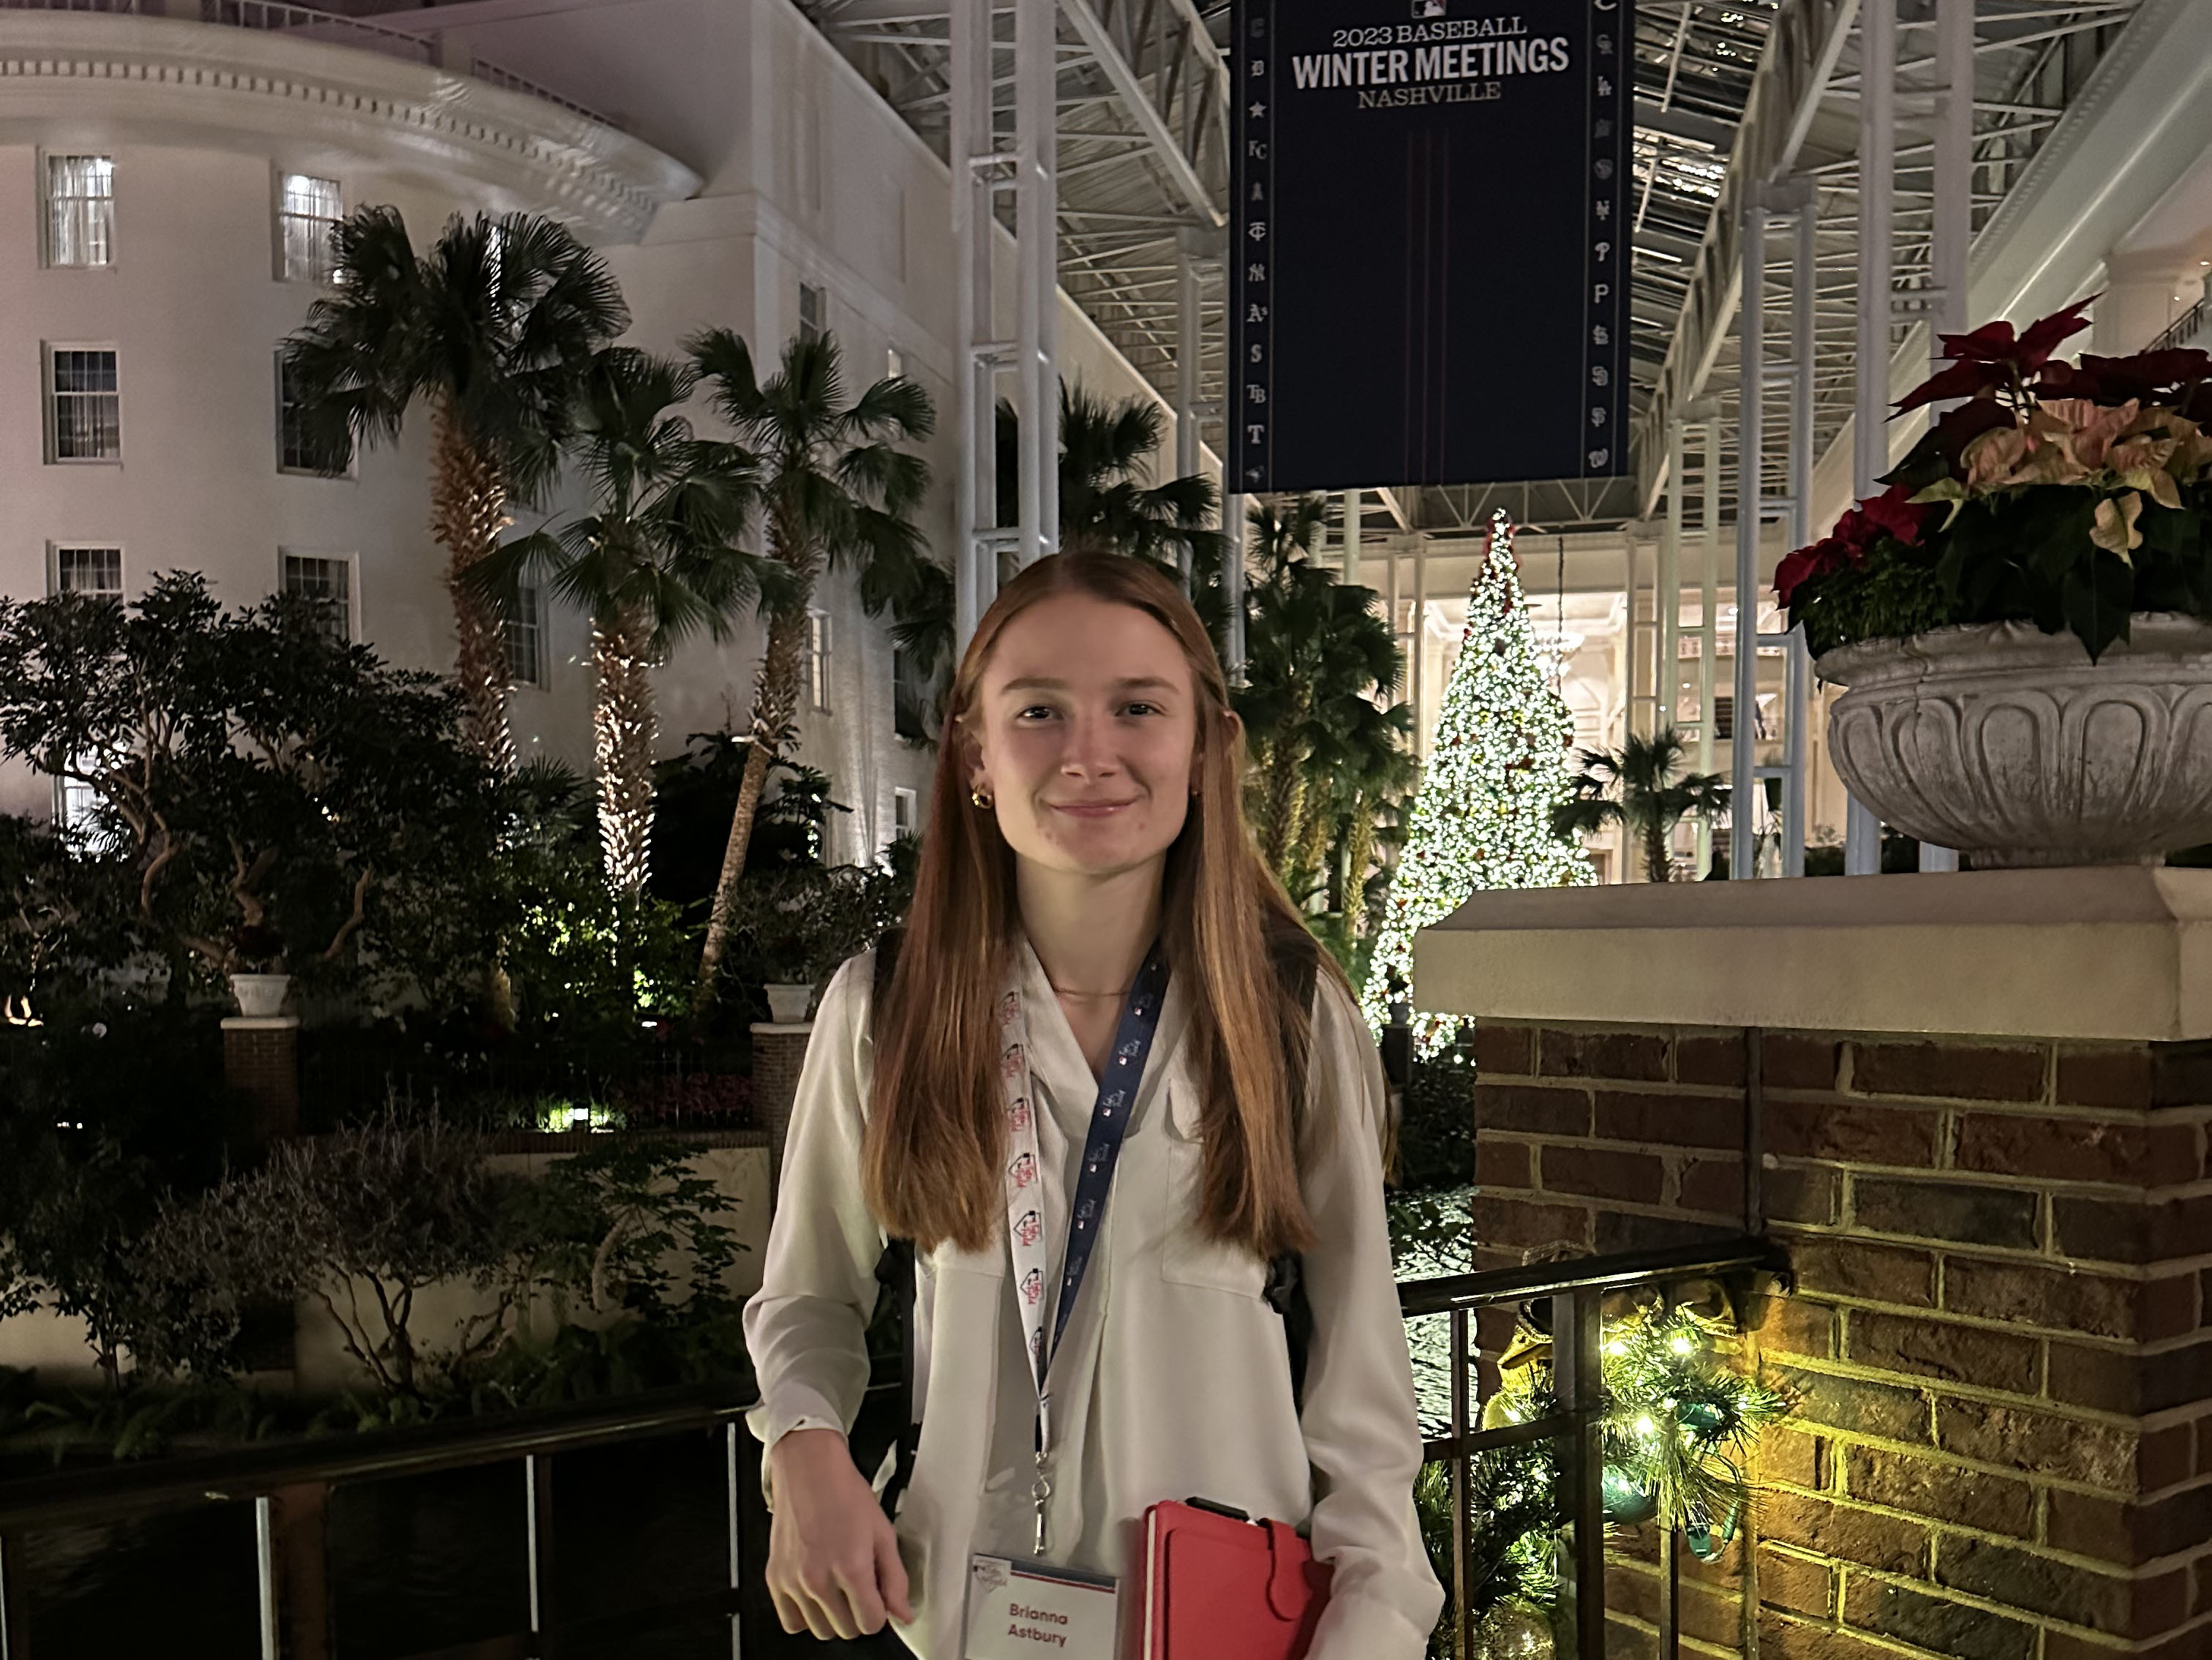 A college student stands in front of a Christmas tree and palm trees and a sign that says 2023 Baseball Winter Meetings Nashville